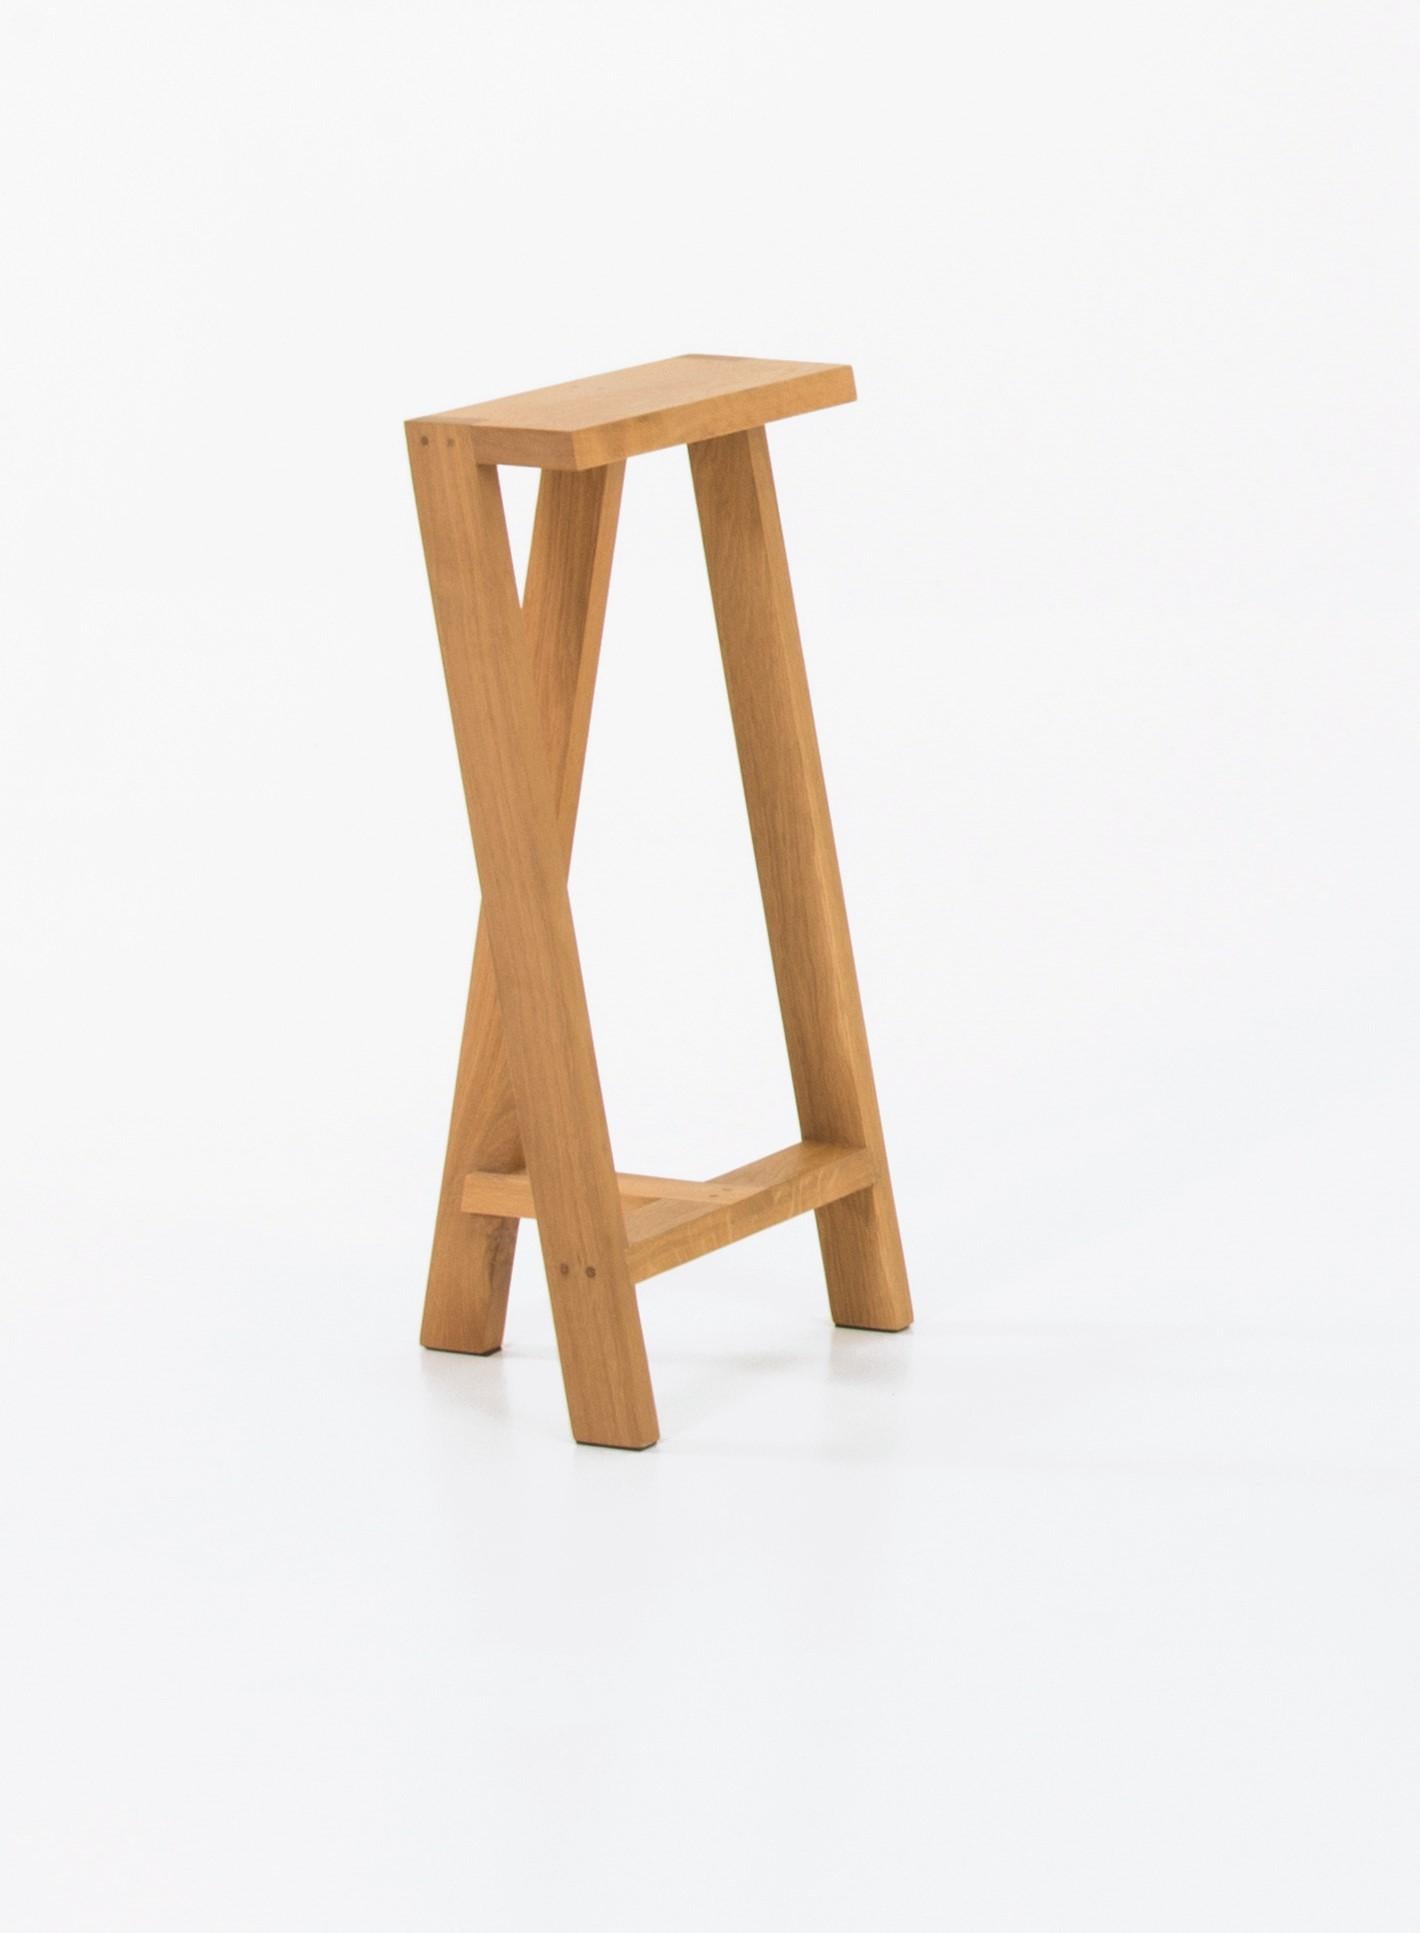 Set of 2 medium Pausa oak stool by Pierre-Emmanuel Vandeputte
Dimensions: D 27 x W 35 x H 65 cm
Materials: oak wood
Available in burnt oak version and in 3 sizes.

Pausa is a series of stools; 45cm, 65cm, or 80cm of assembled oak pieces. 
The